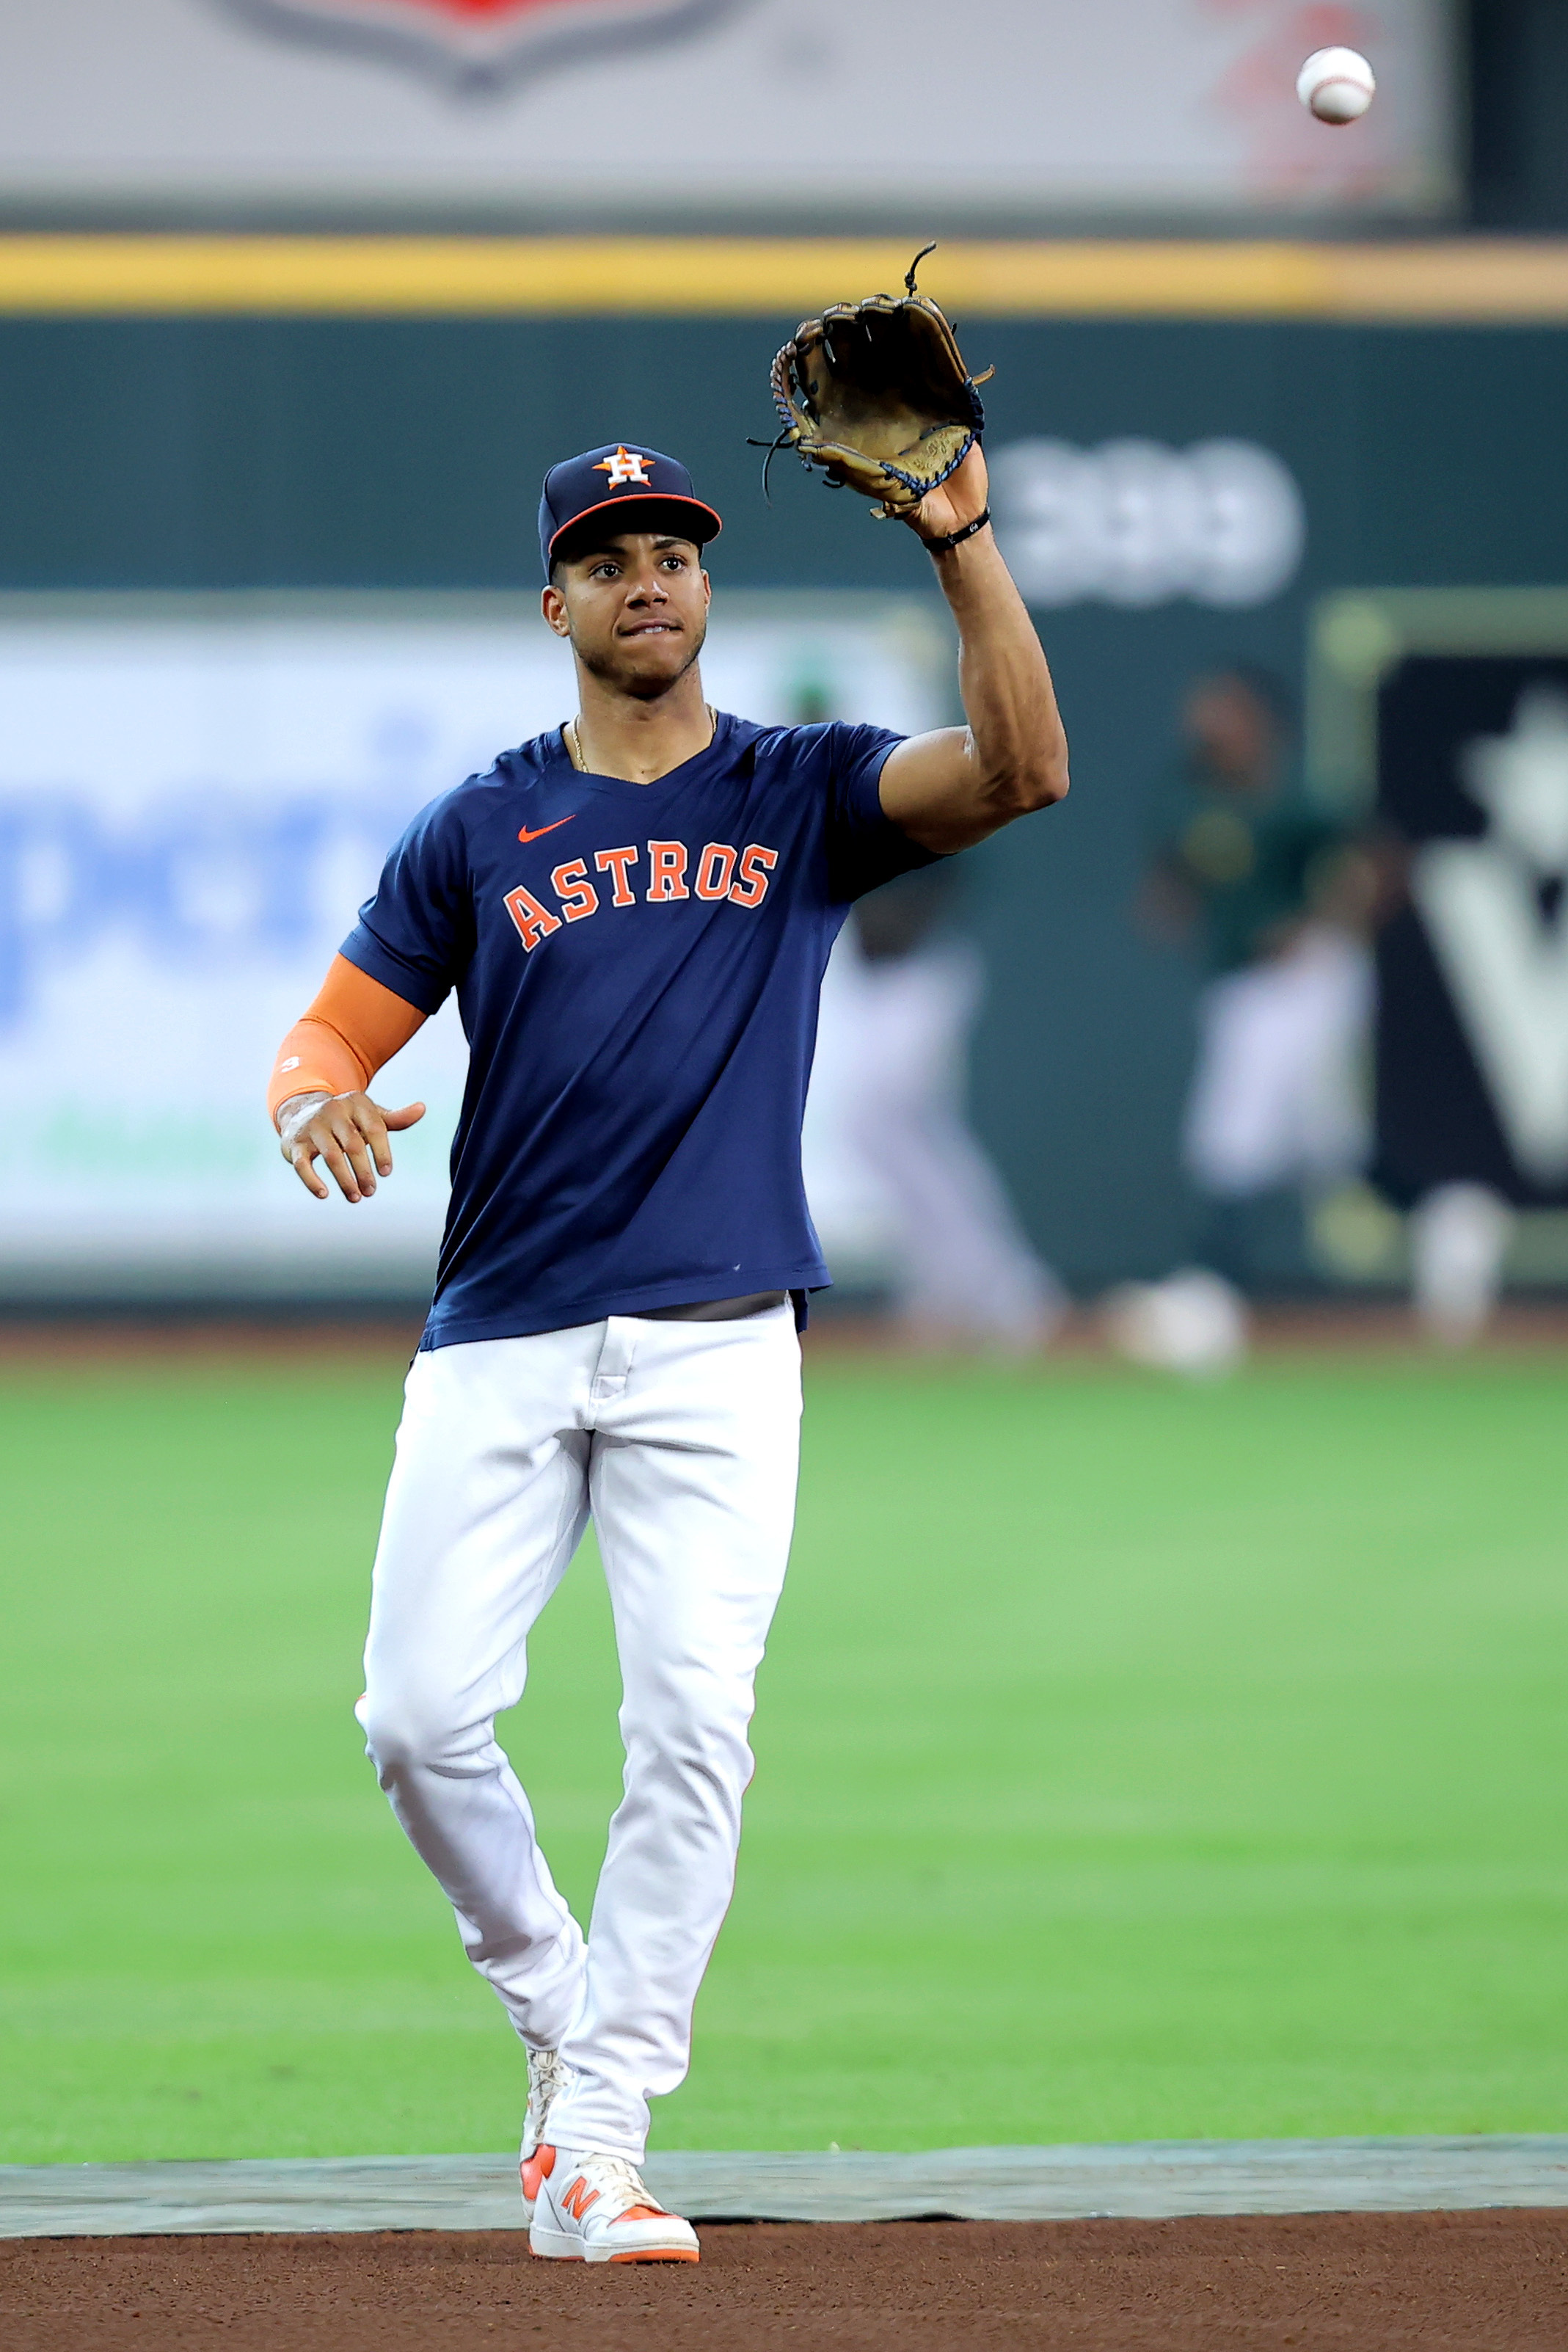 Astros batter A's 9-2 to complete four-game sweep